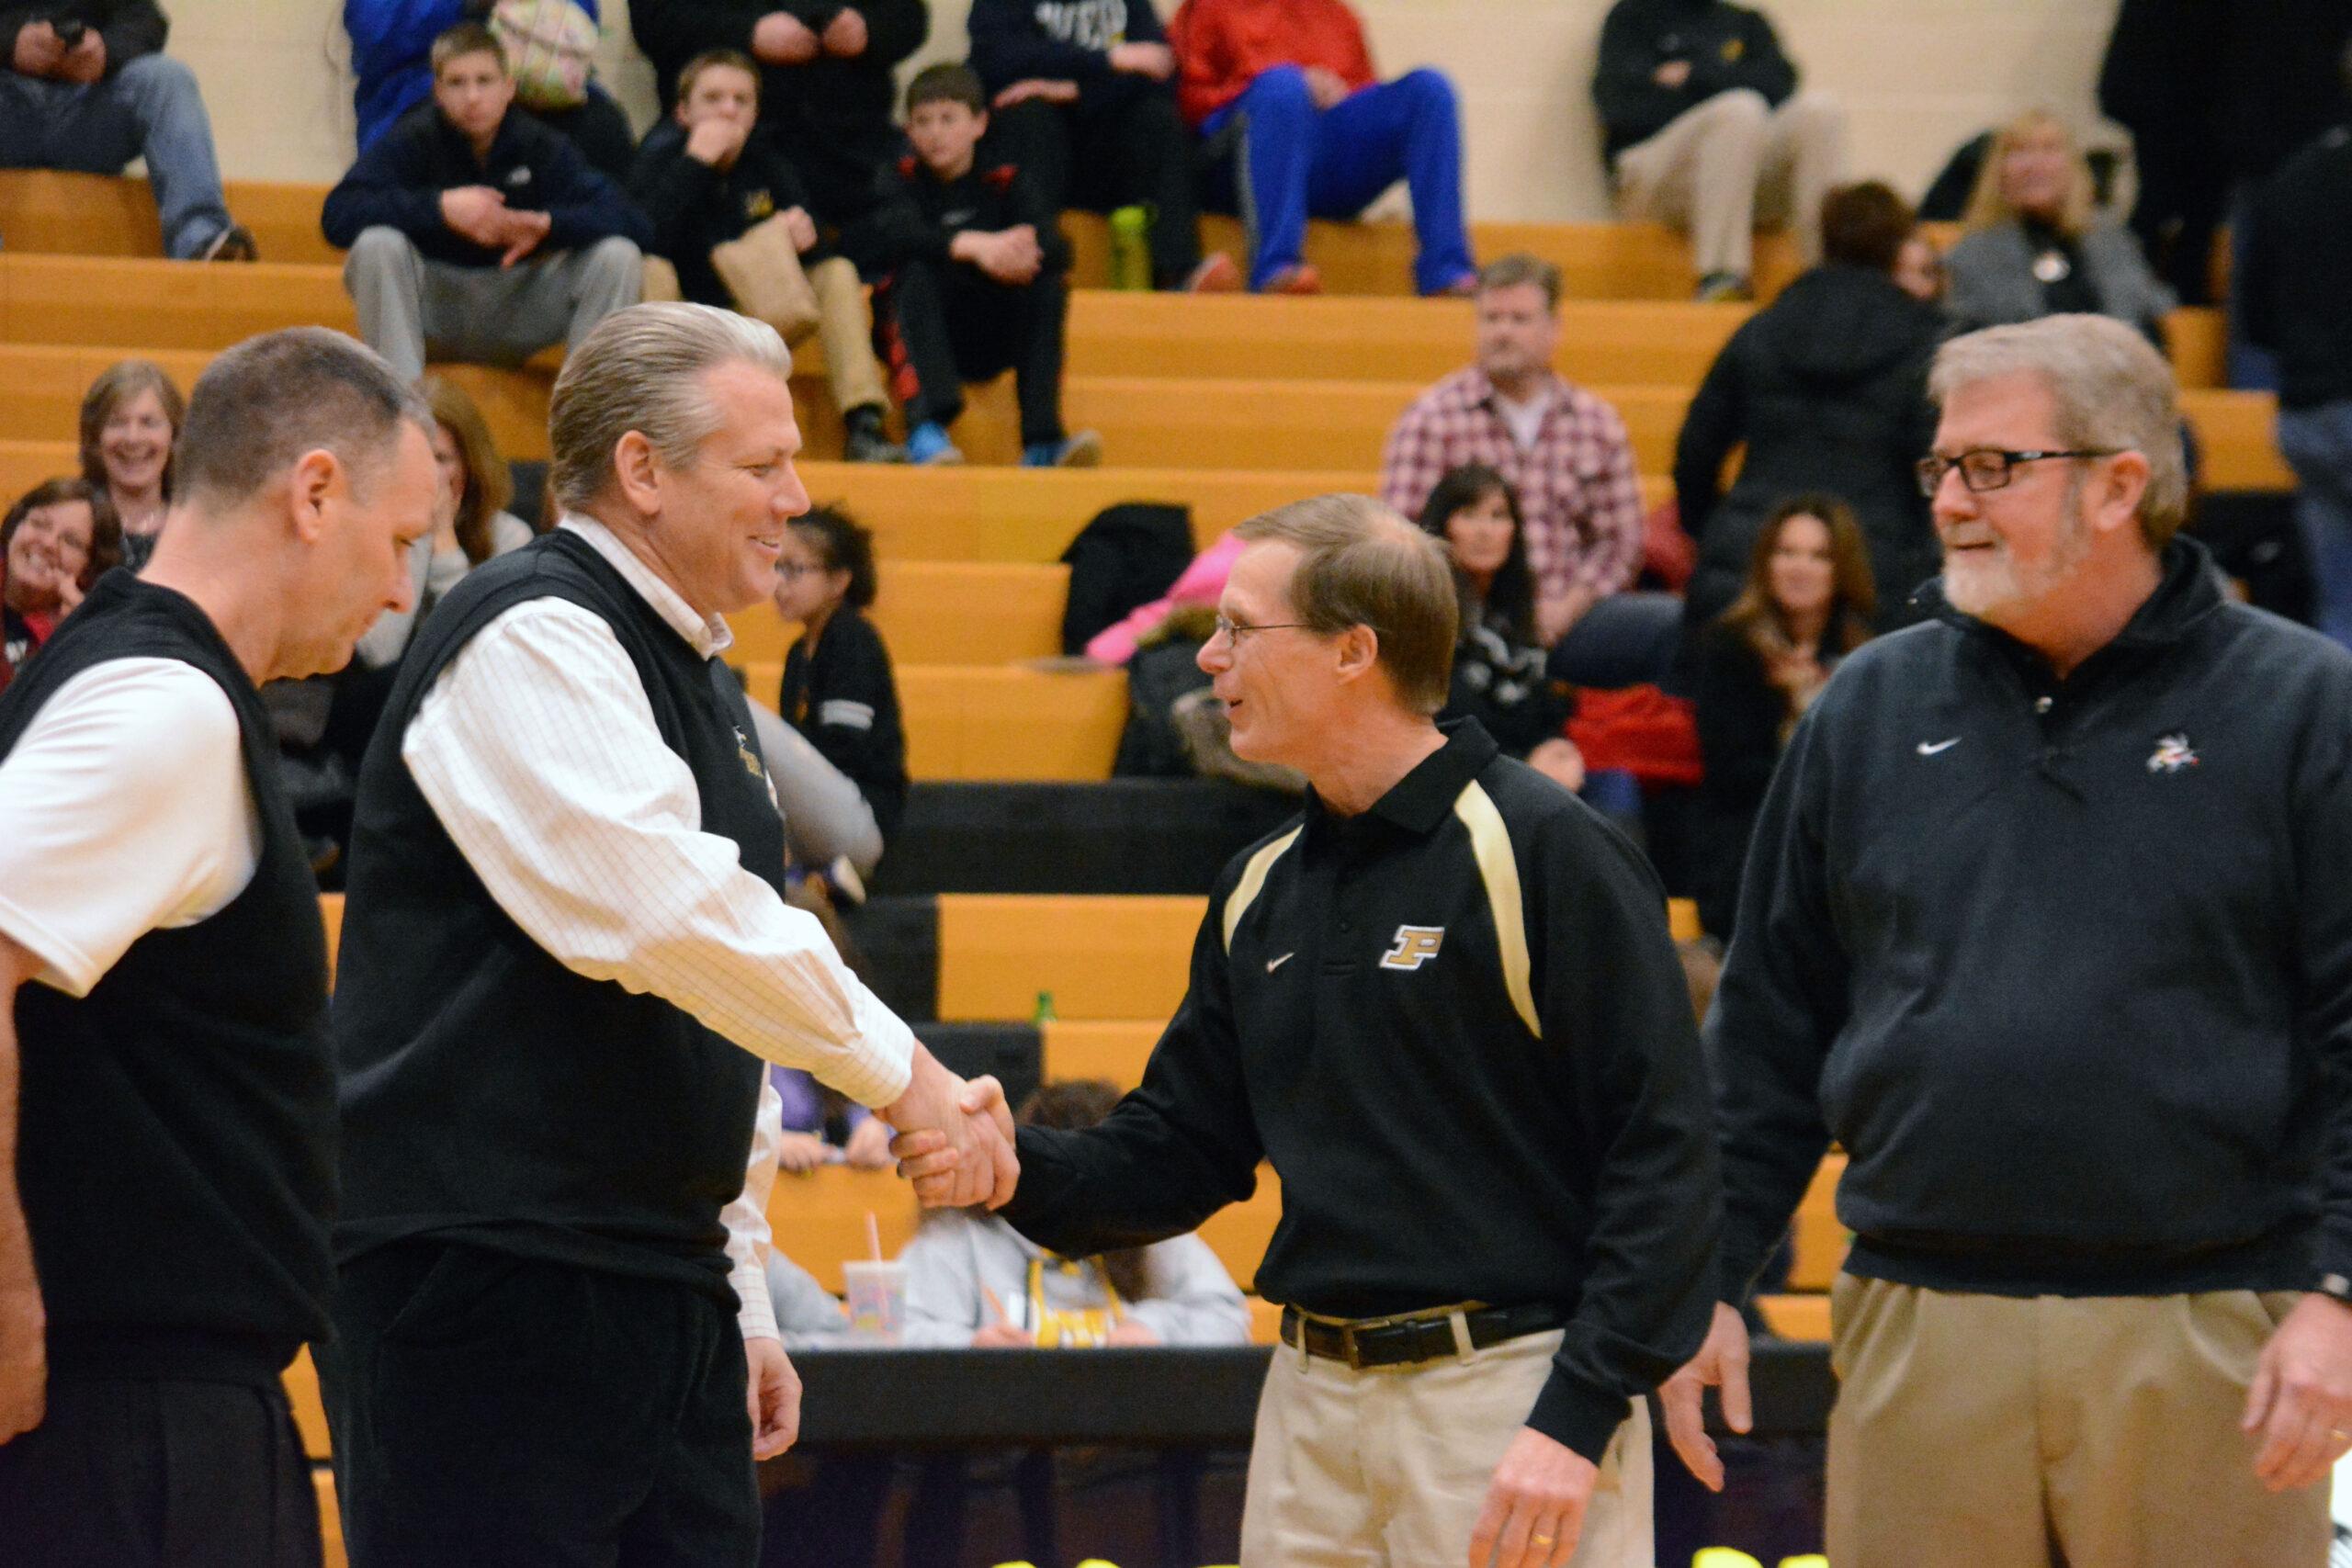 Retiring athletic director Ray Pohlman is congratulated by Superintendent Tom Hosler.